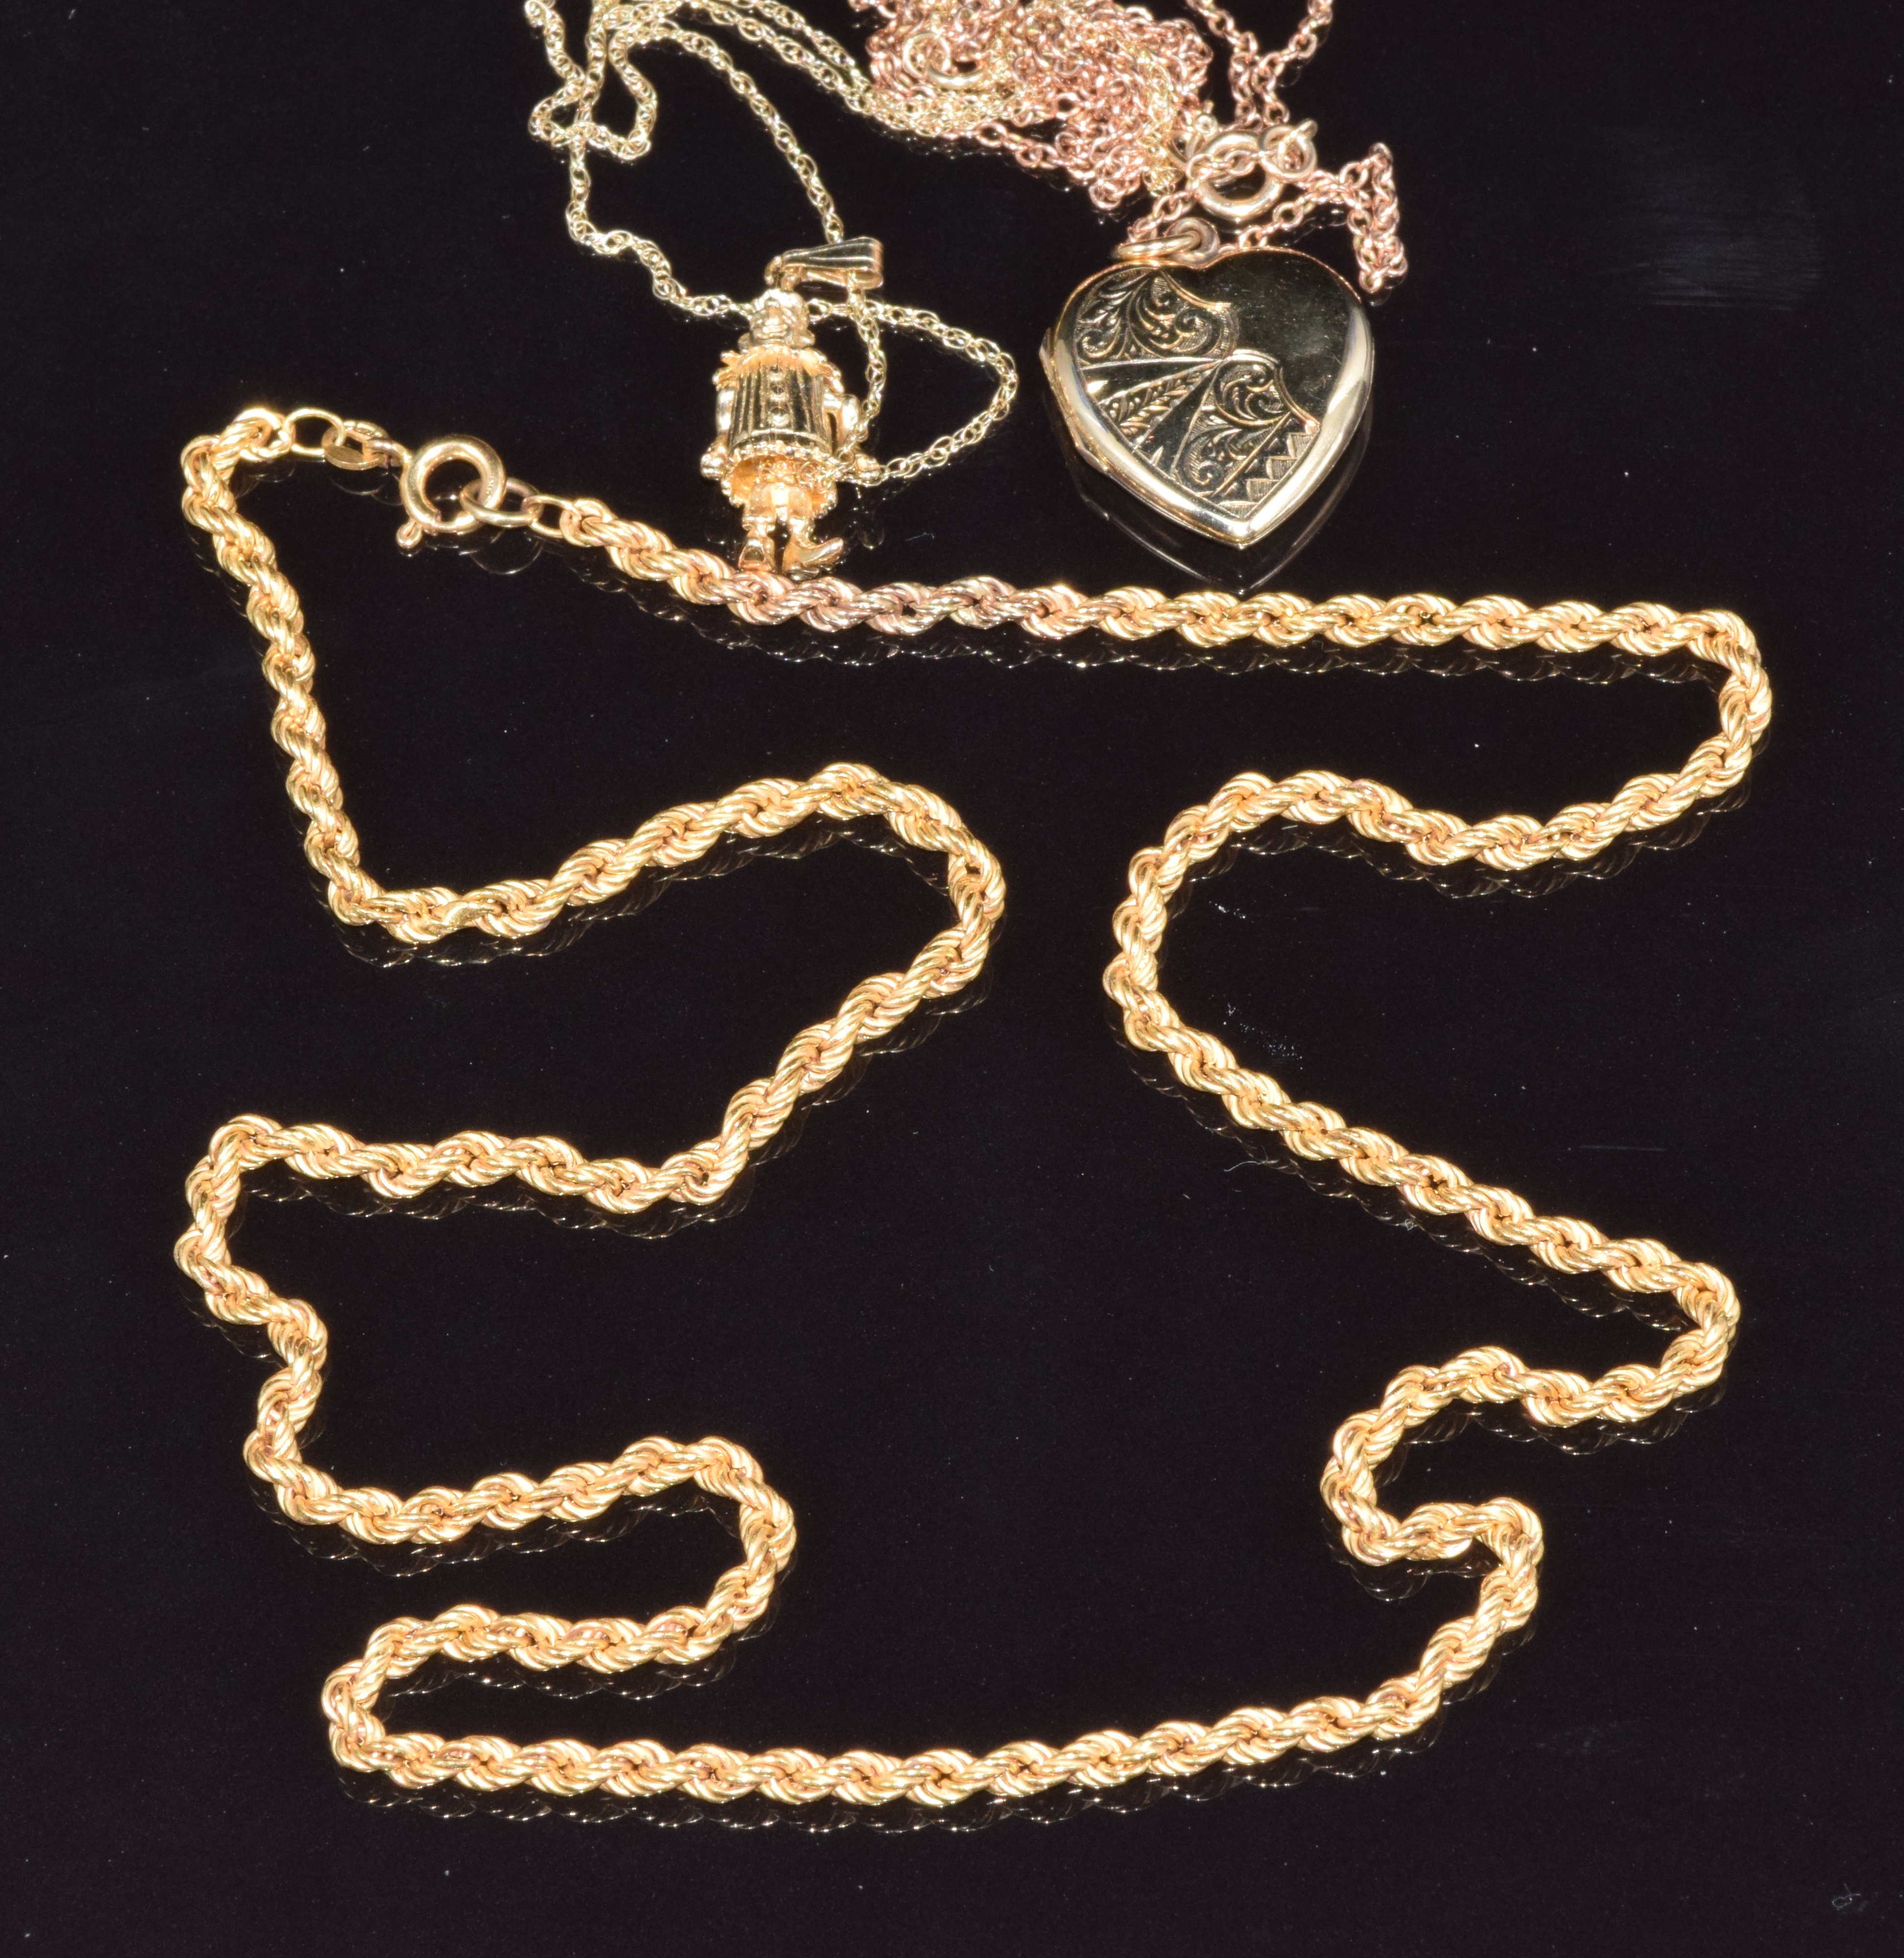 Three 9ct gold necklaces/chains, a 9ct gold clown pendant and a 9ct gold heart padlock, 13g